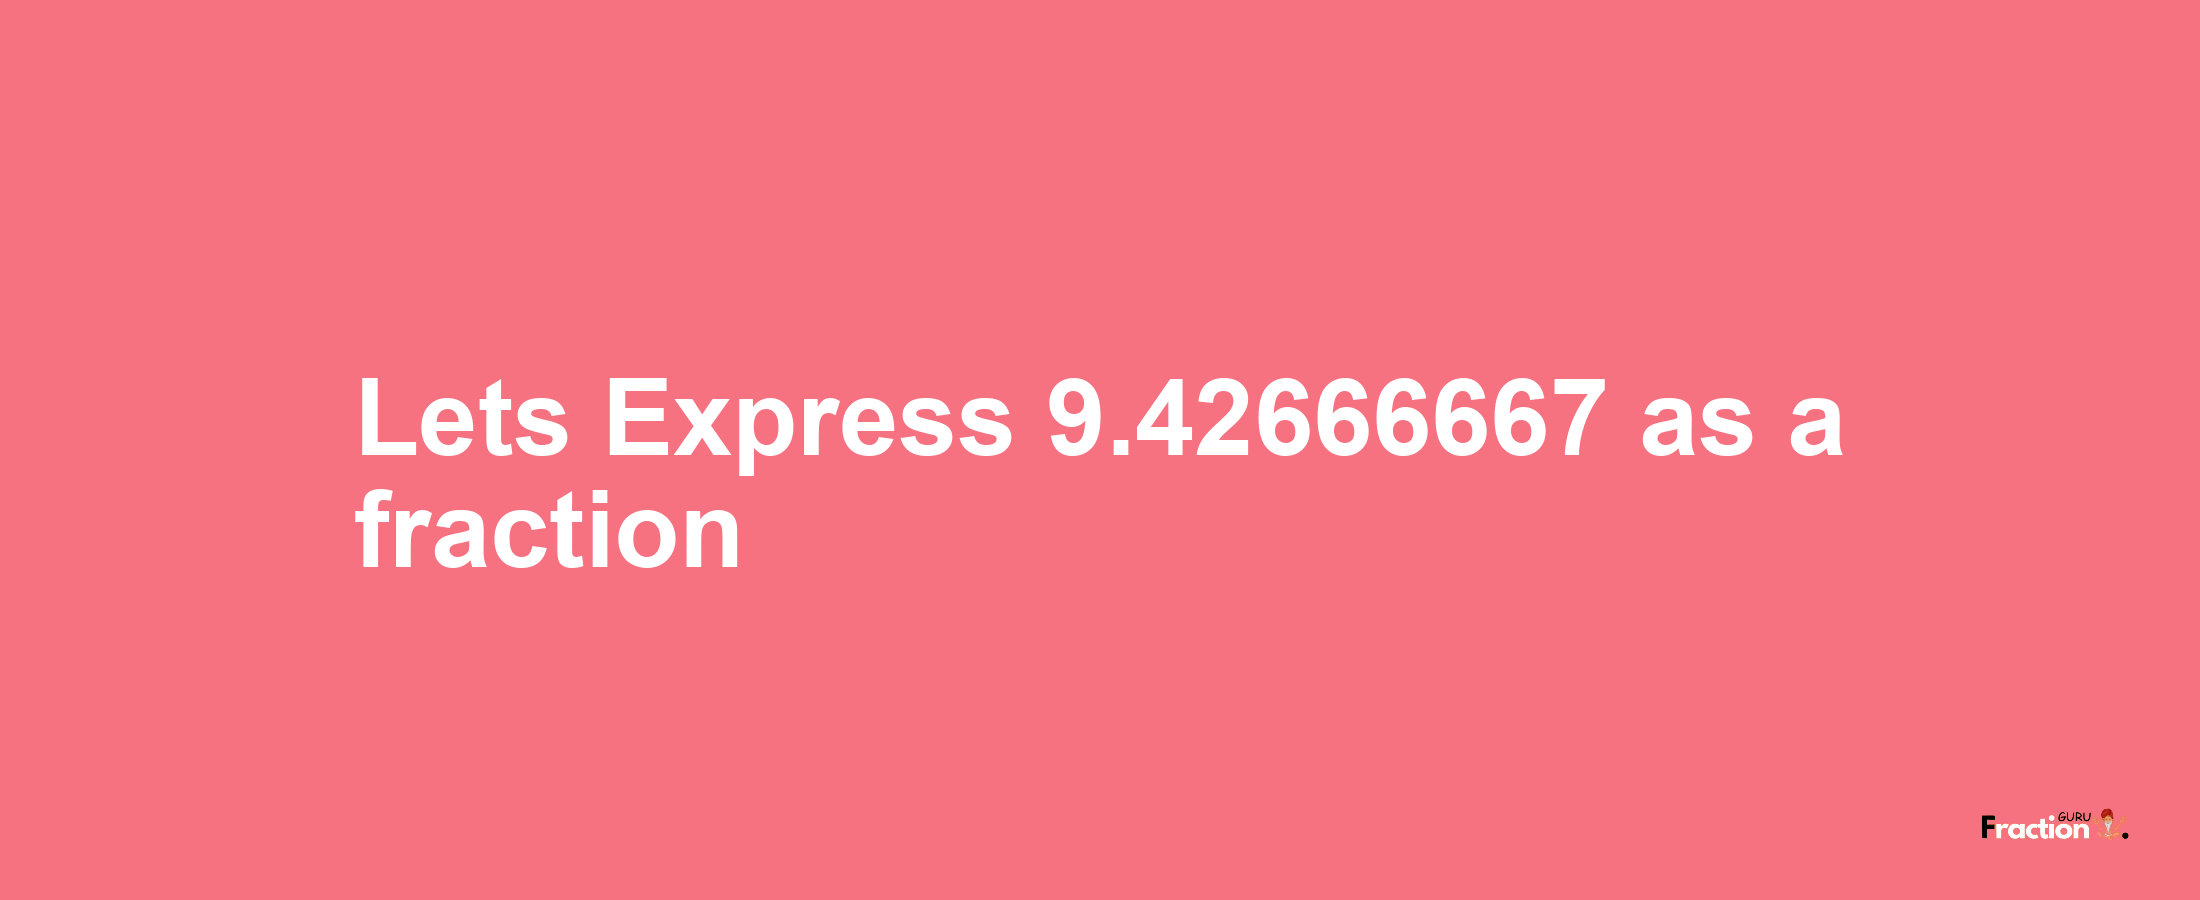 Lets Express 9.42666667 as afraction